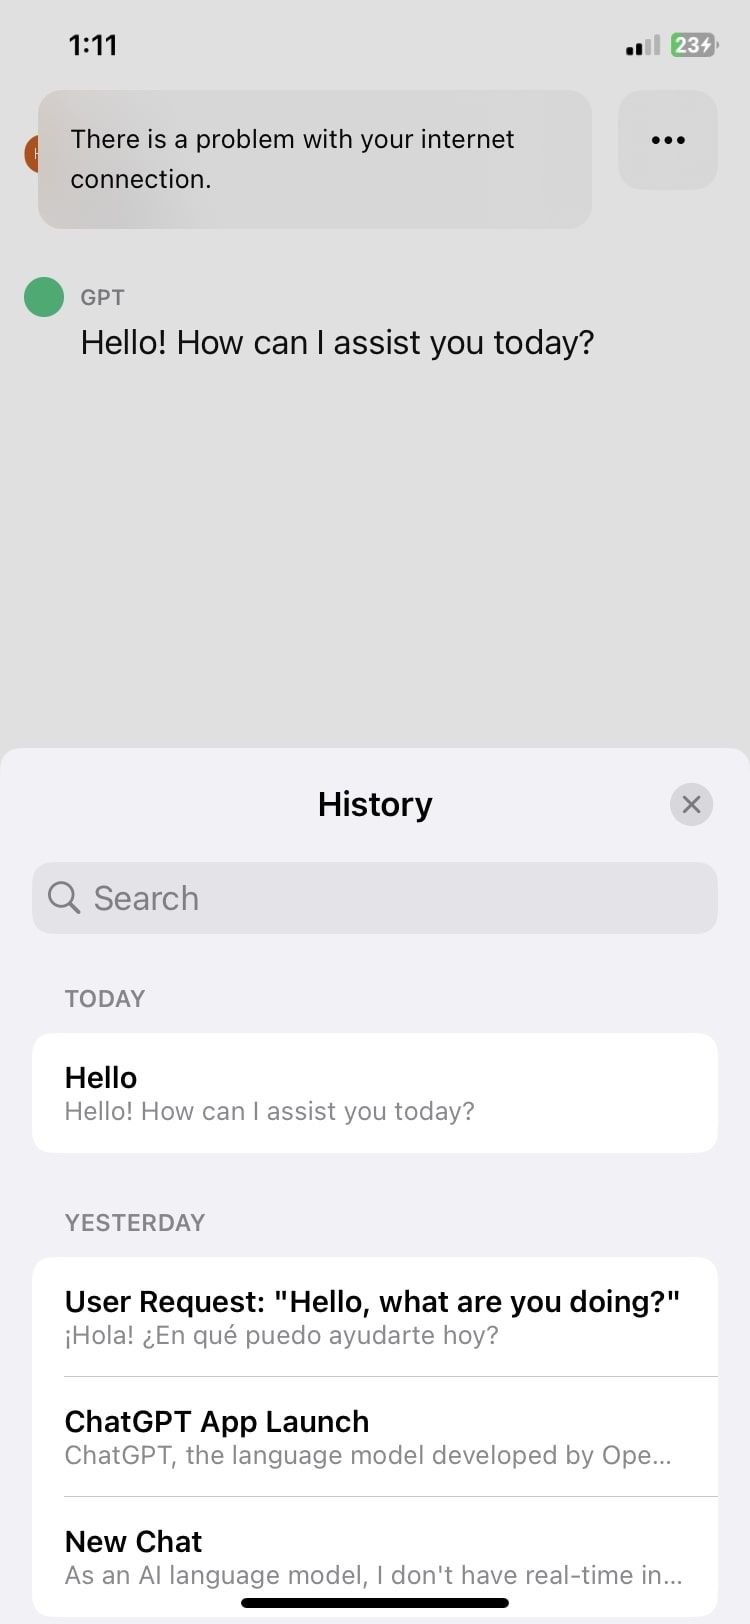 viewing chatGPT history while offline in iOS app